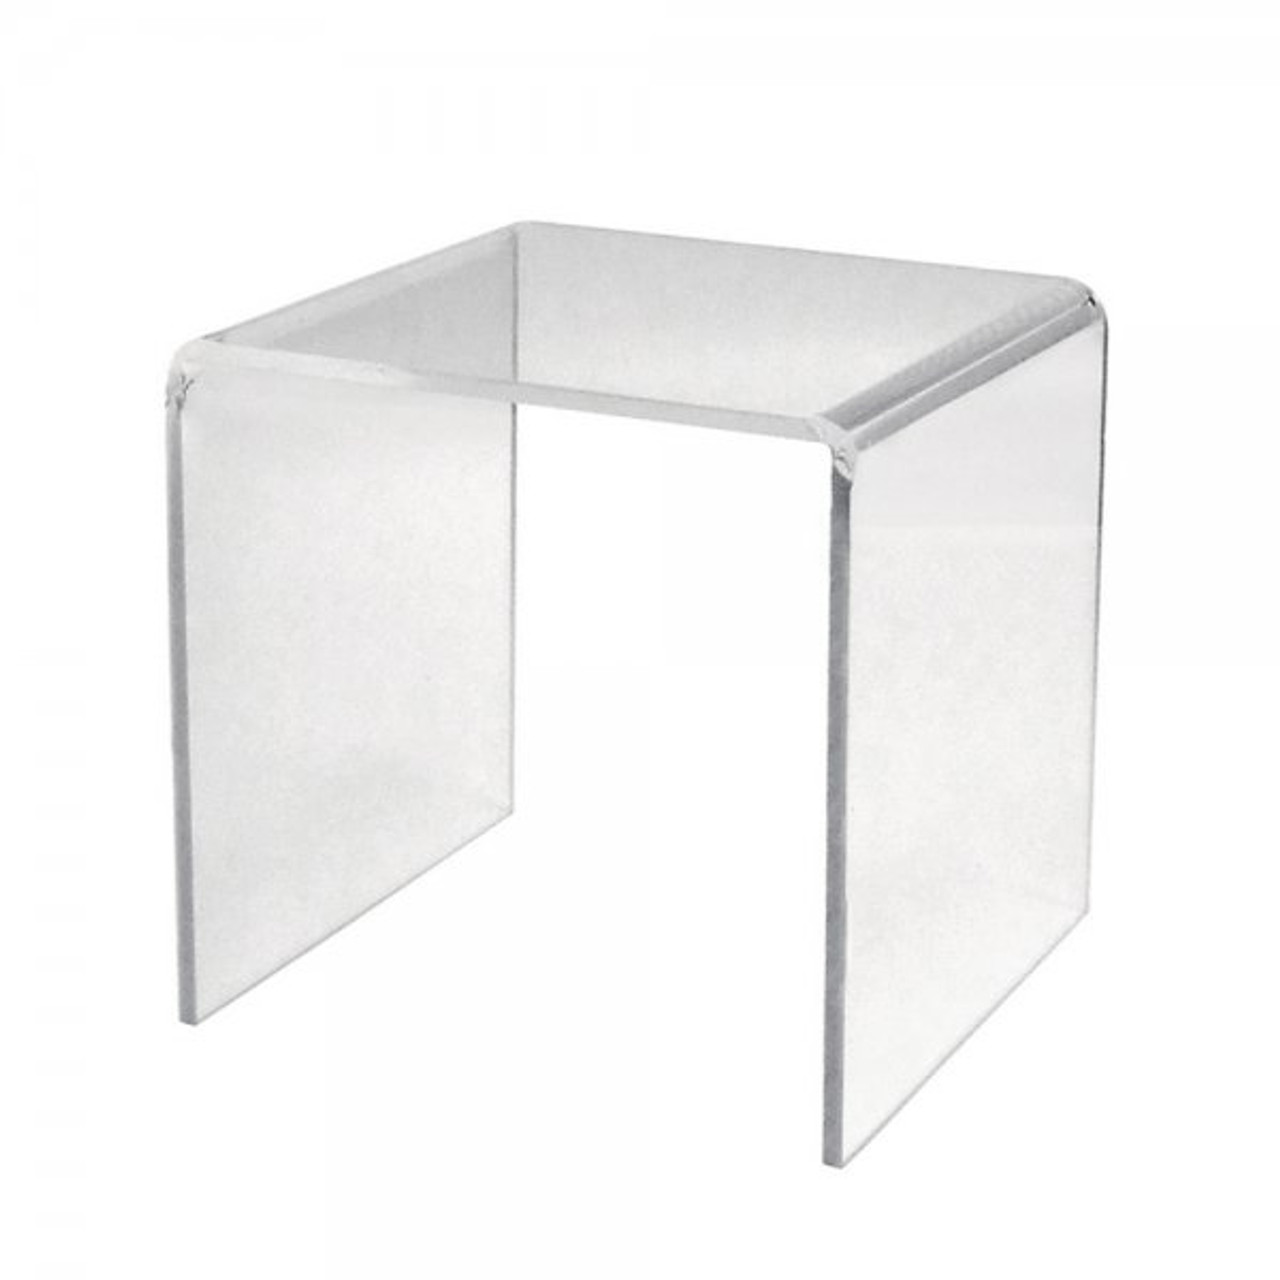 4"x4"x4" Square Clear Acrylic Individual Risers